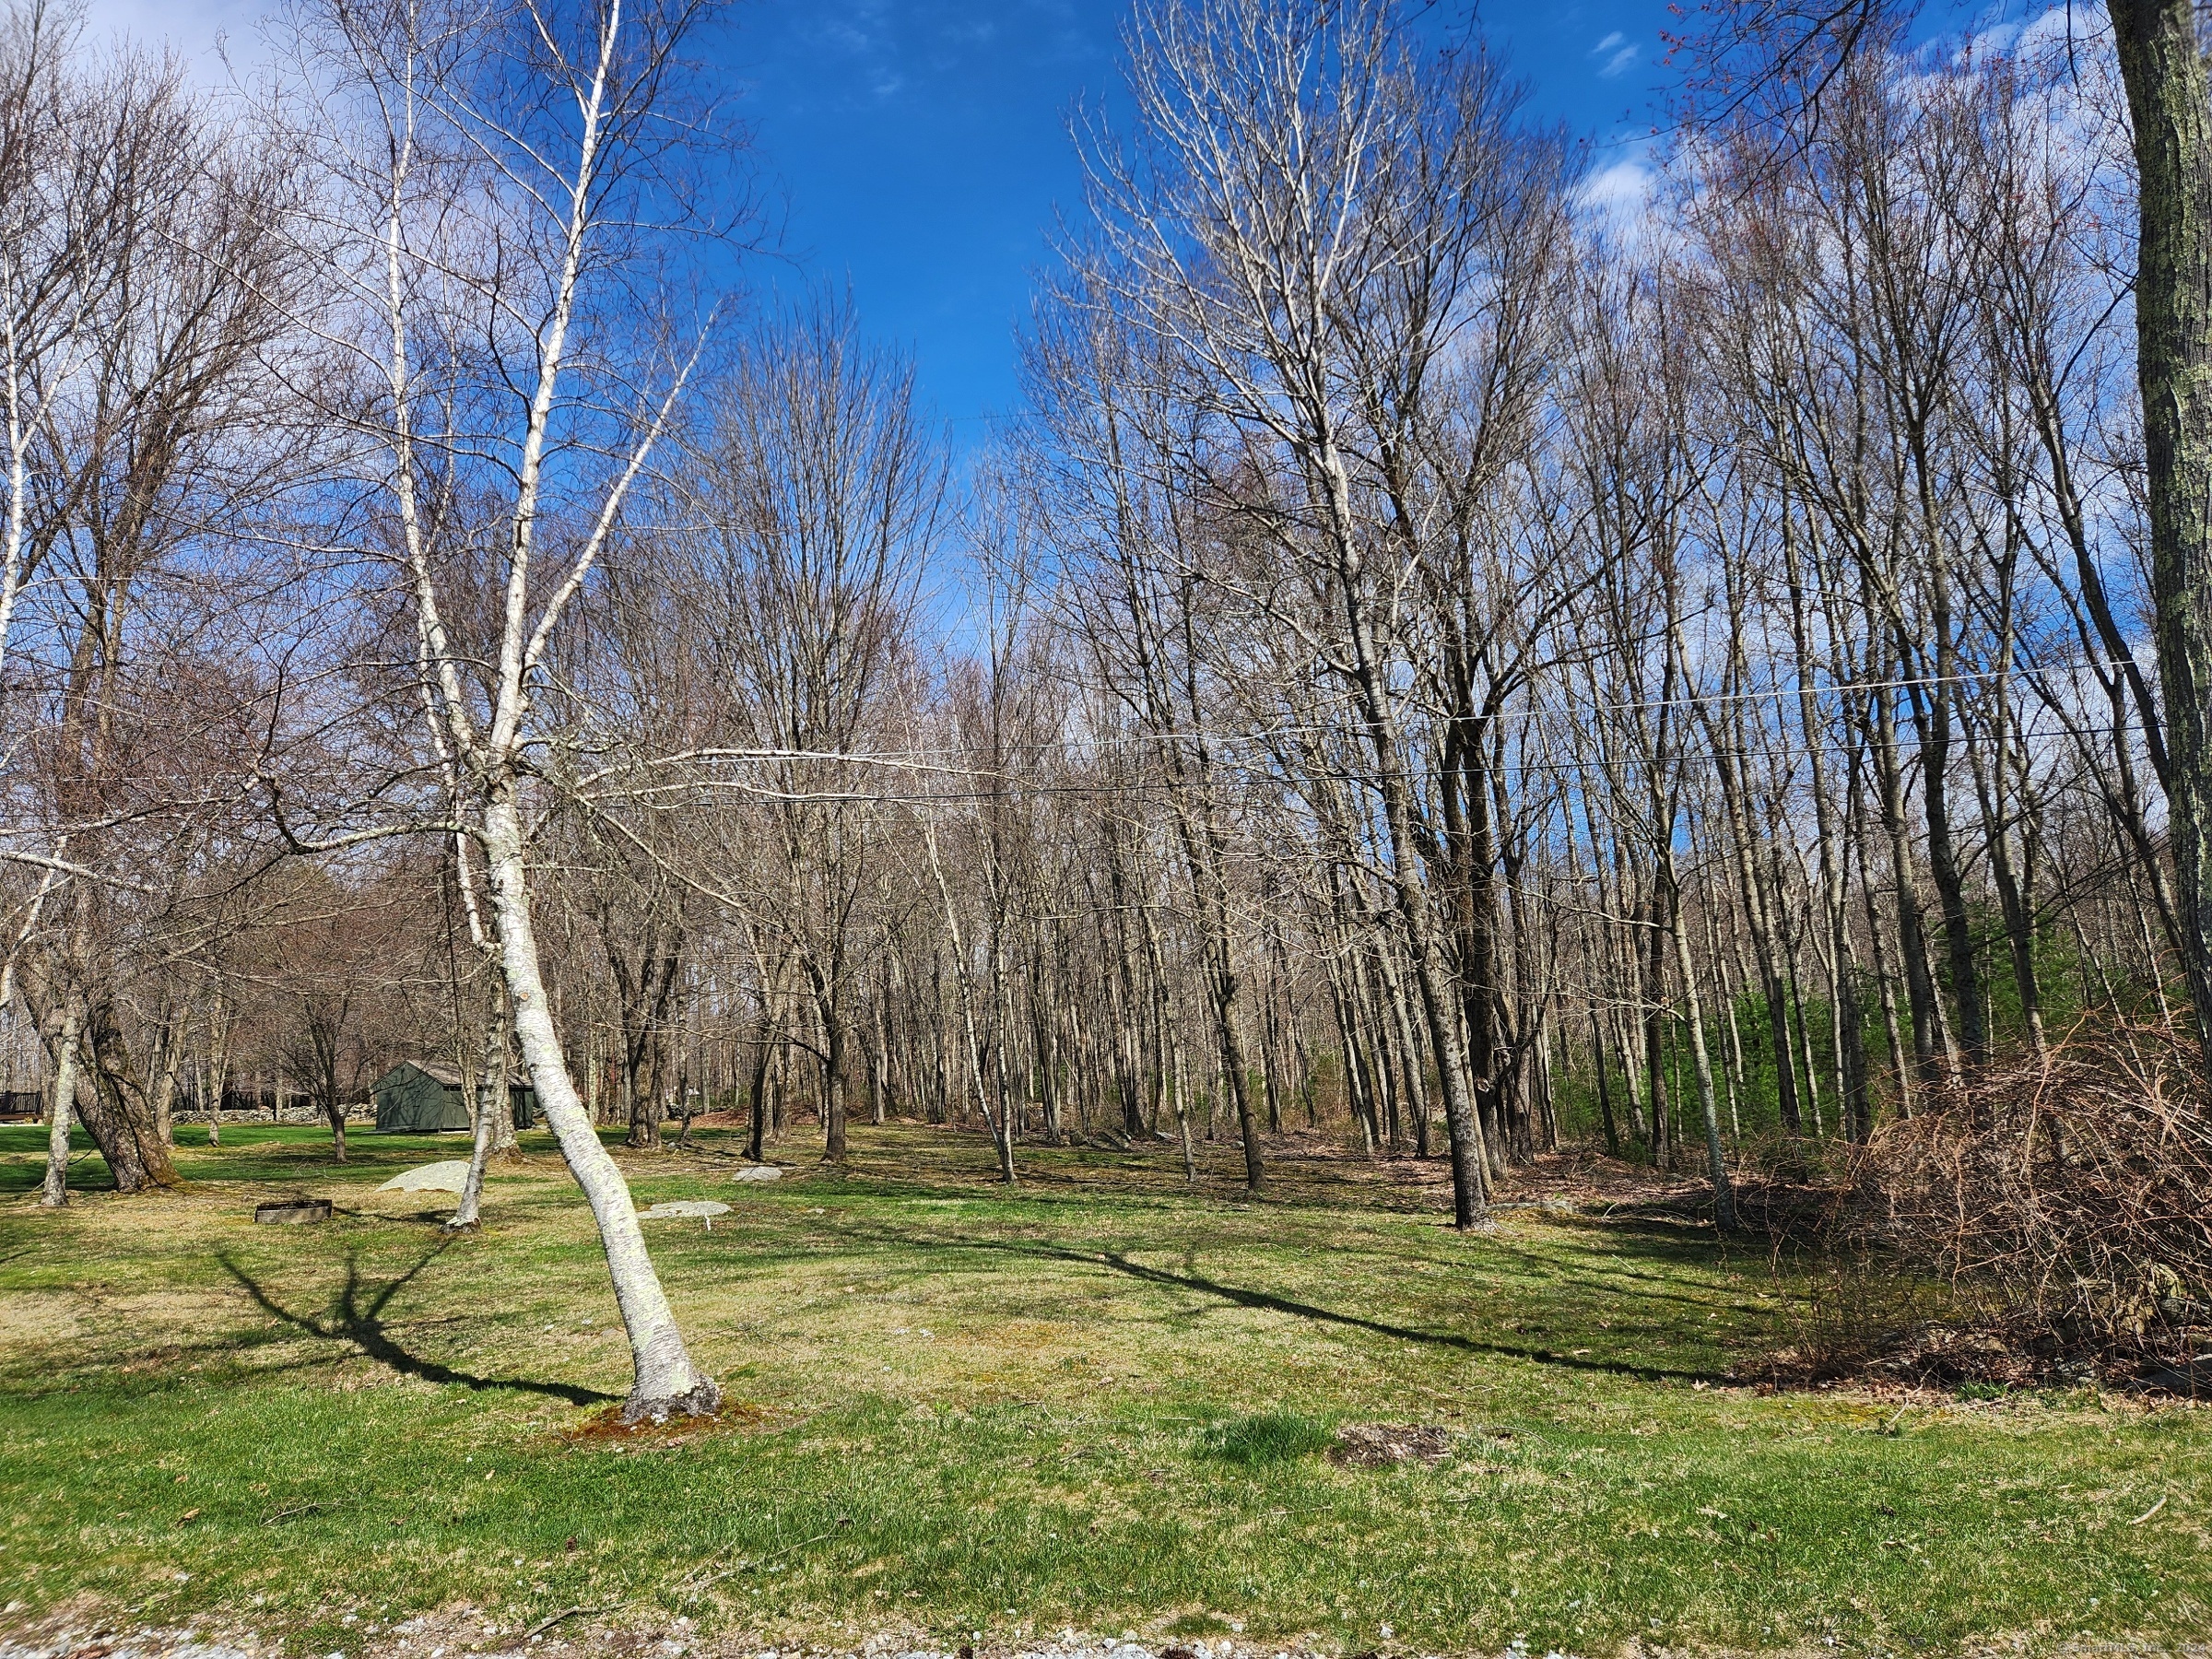 a view of a backyard with swings